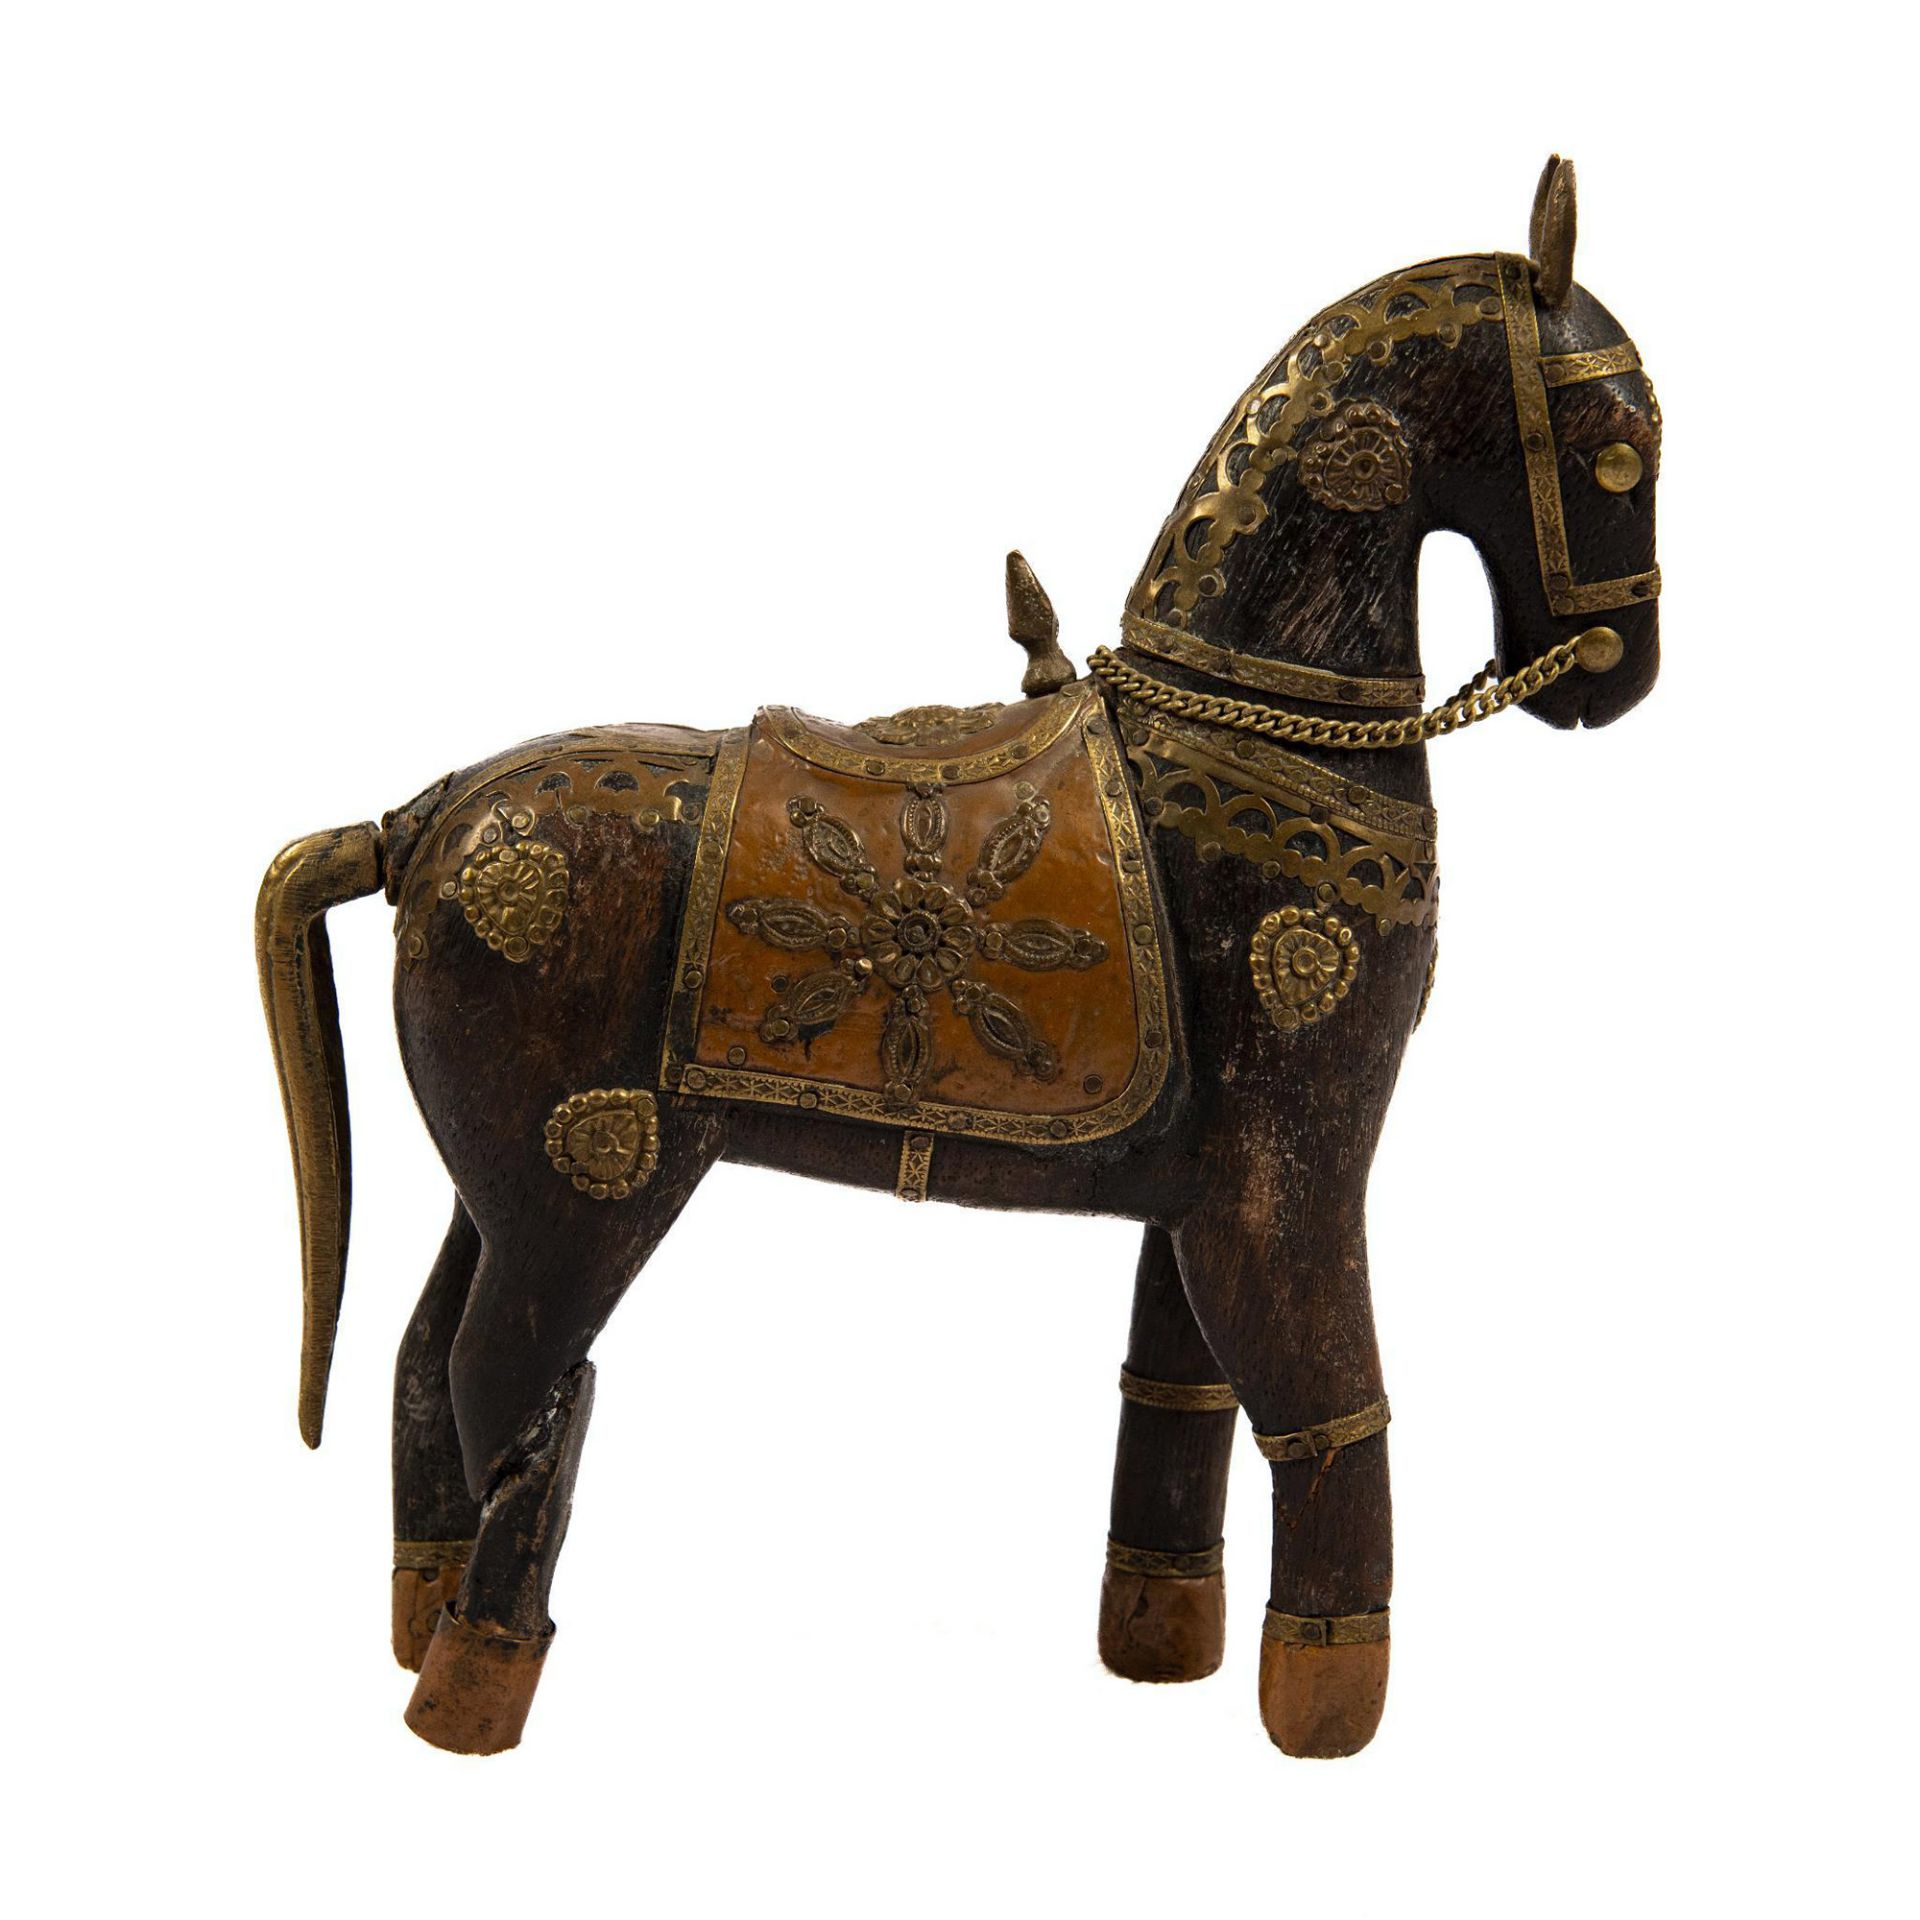 Rajasthani Indian Wooden War Horse, Brass & Copper Accents - Image 3 of 4